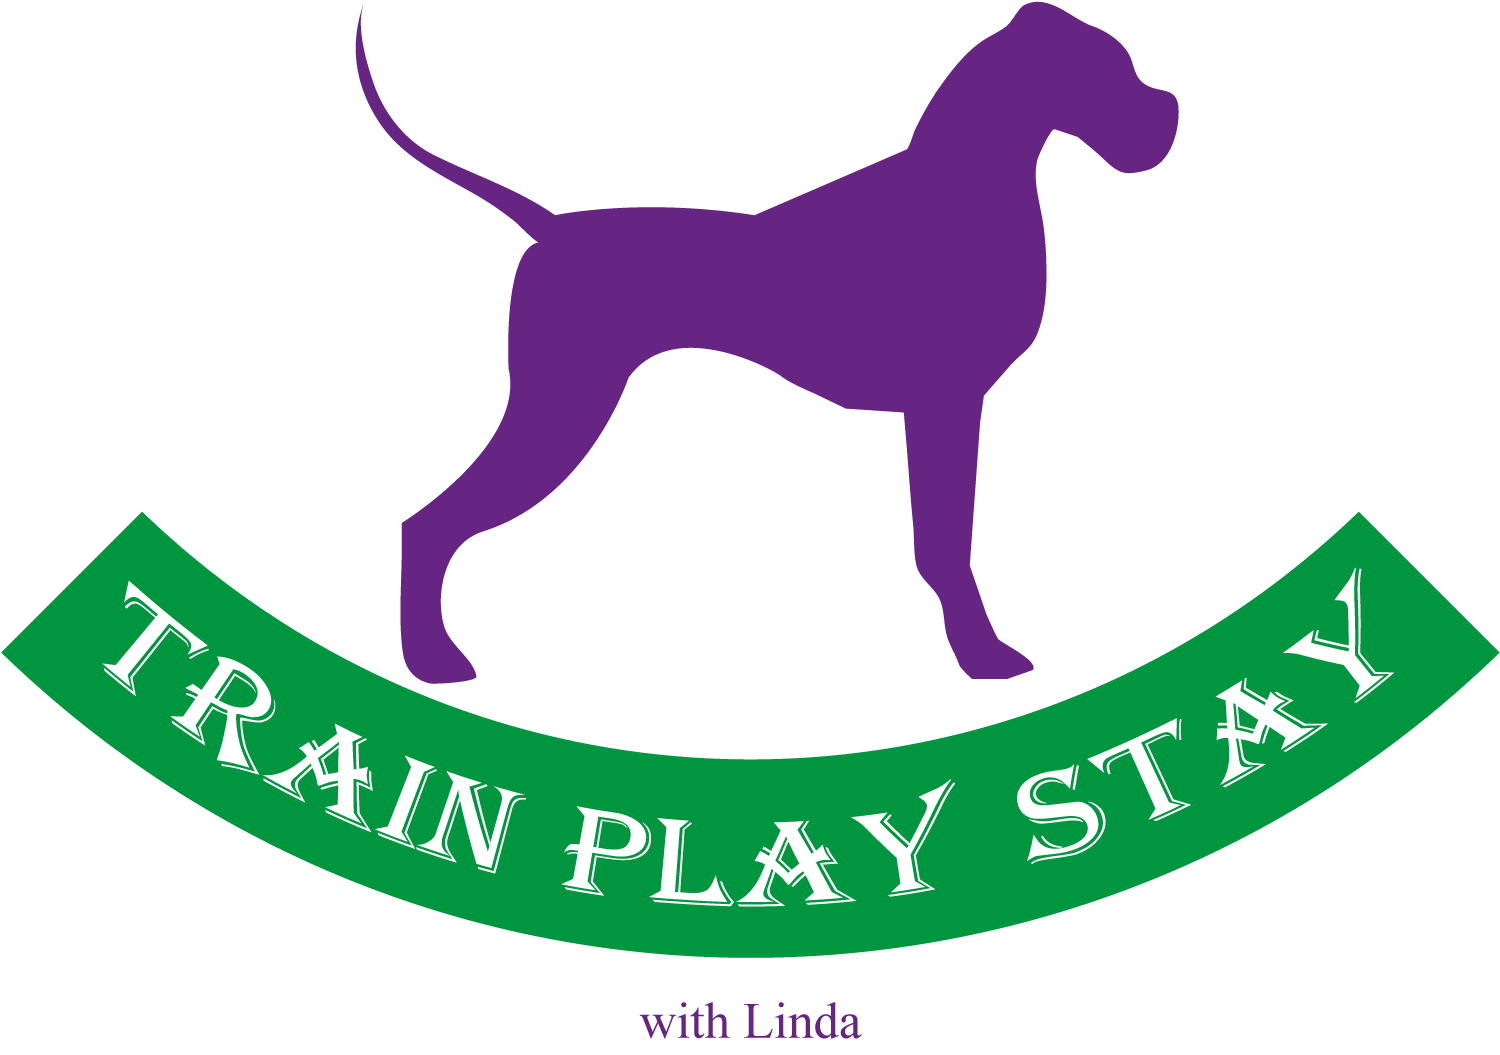 Colorful Dog Logo - Playful, Colorful, Dog Training Logo Design for Train Play Stay OR